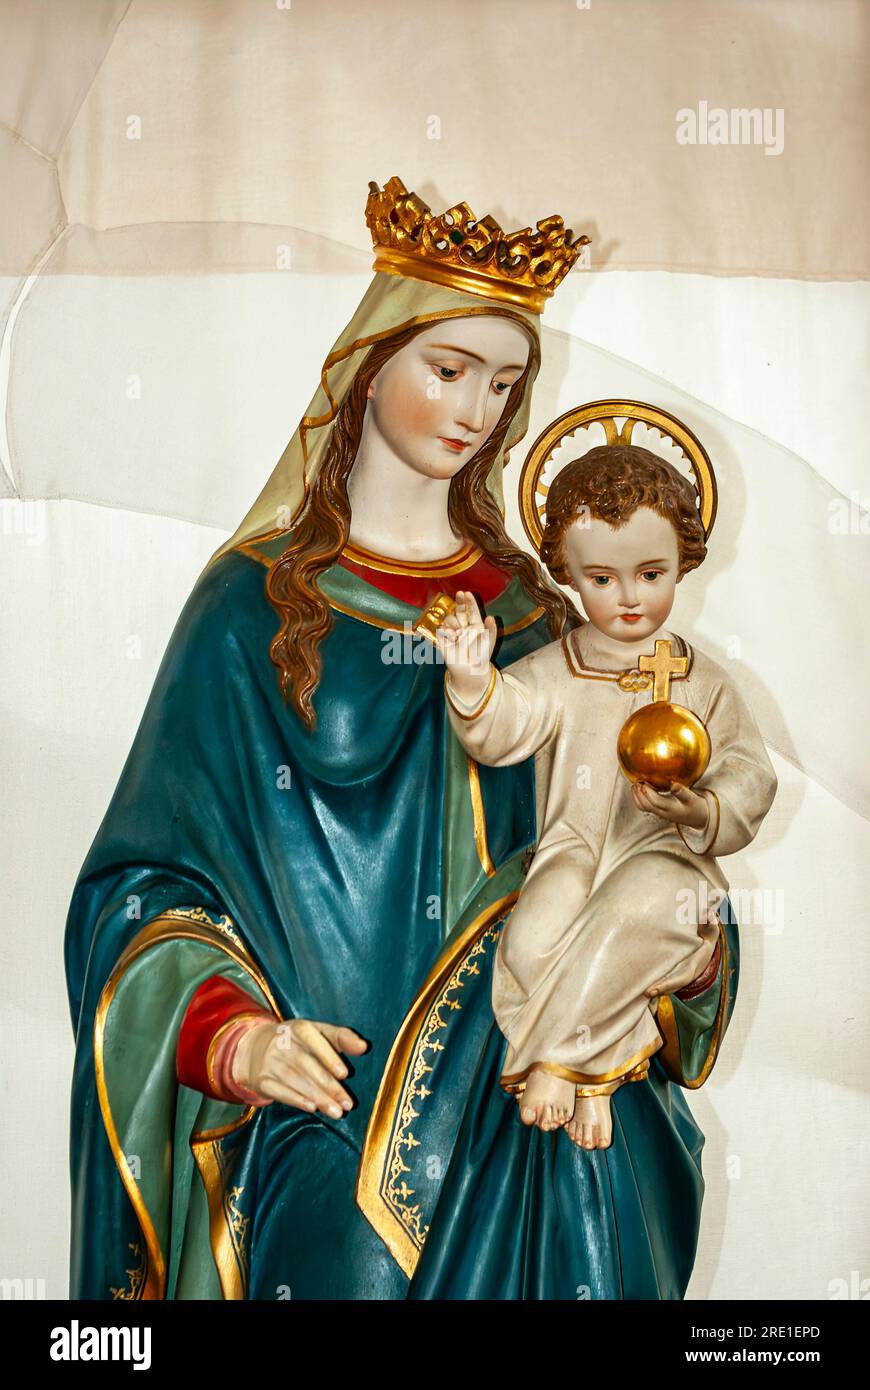 Figural group of Madonna and Child in the Christ the King Chapel in the former orangery of Hohenschwangau Castle, Schwangau, Bavaria, Germany. Stock Photo